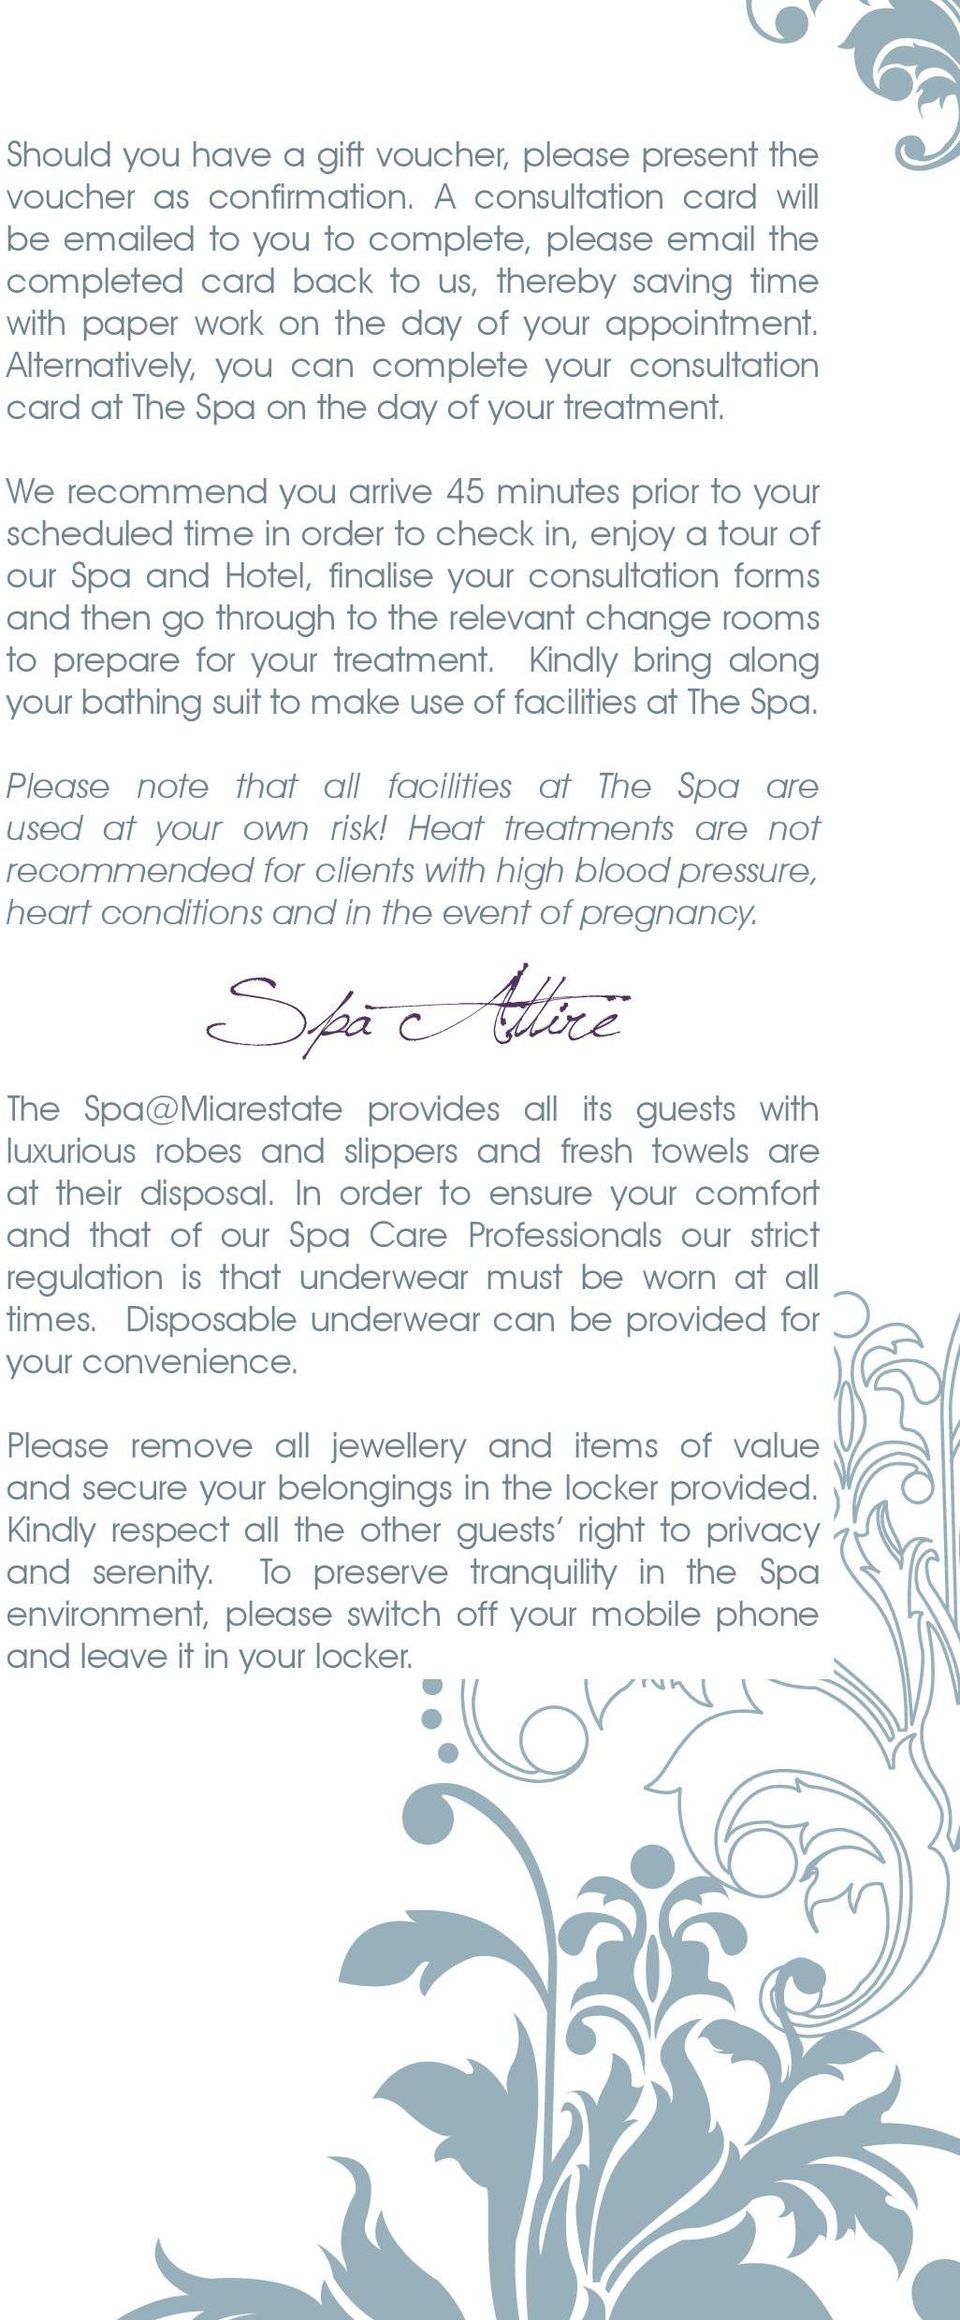 Alternatively, you can complete your consultation card at The Spa on the day of your treatment.